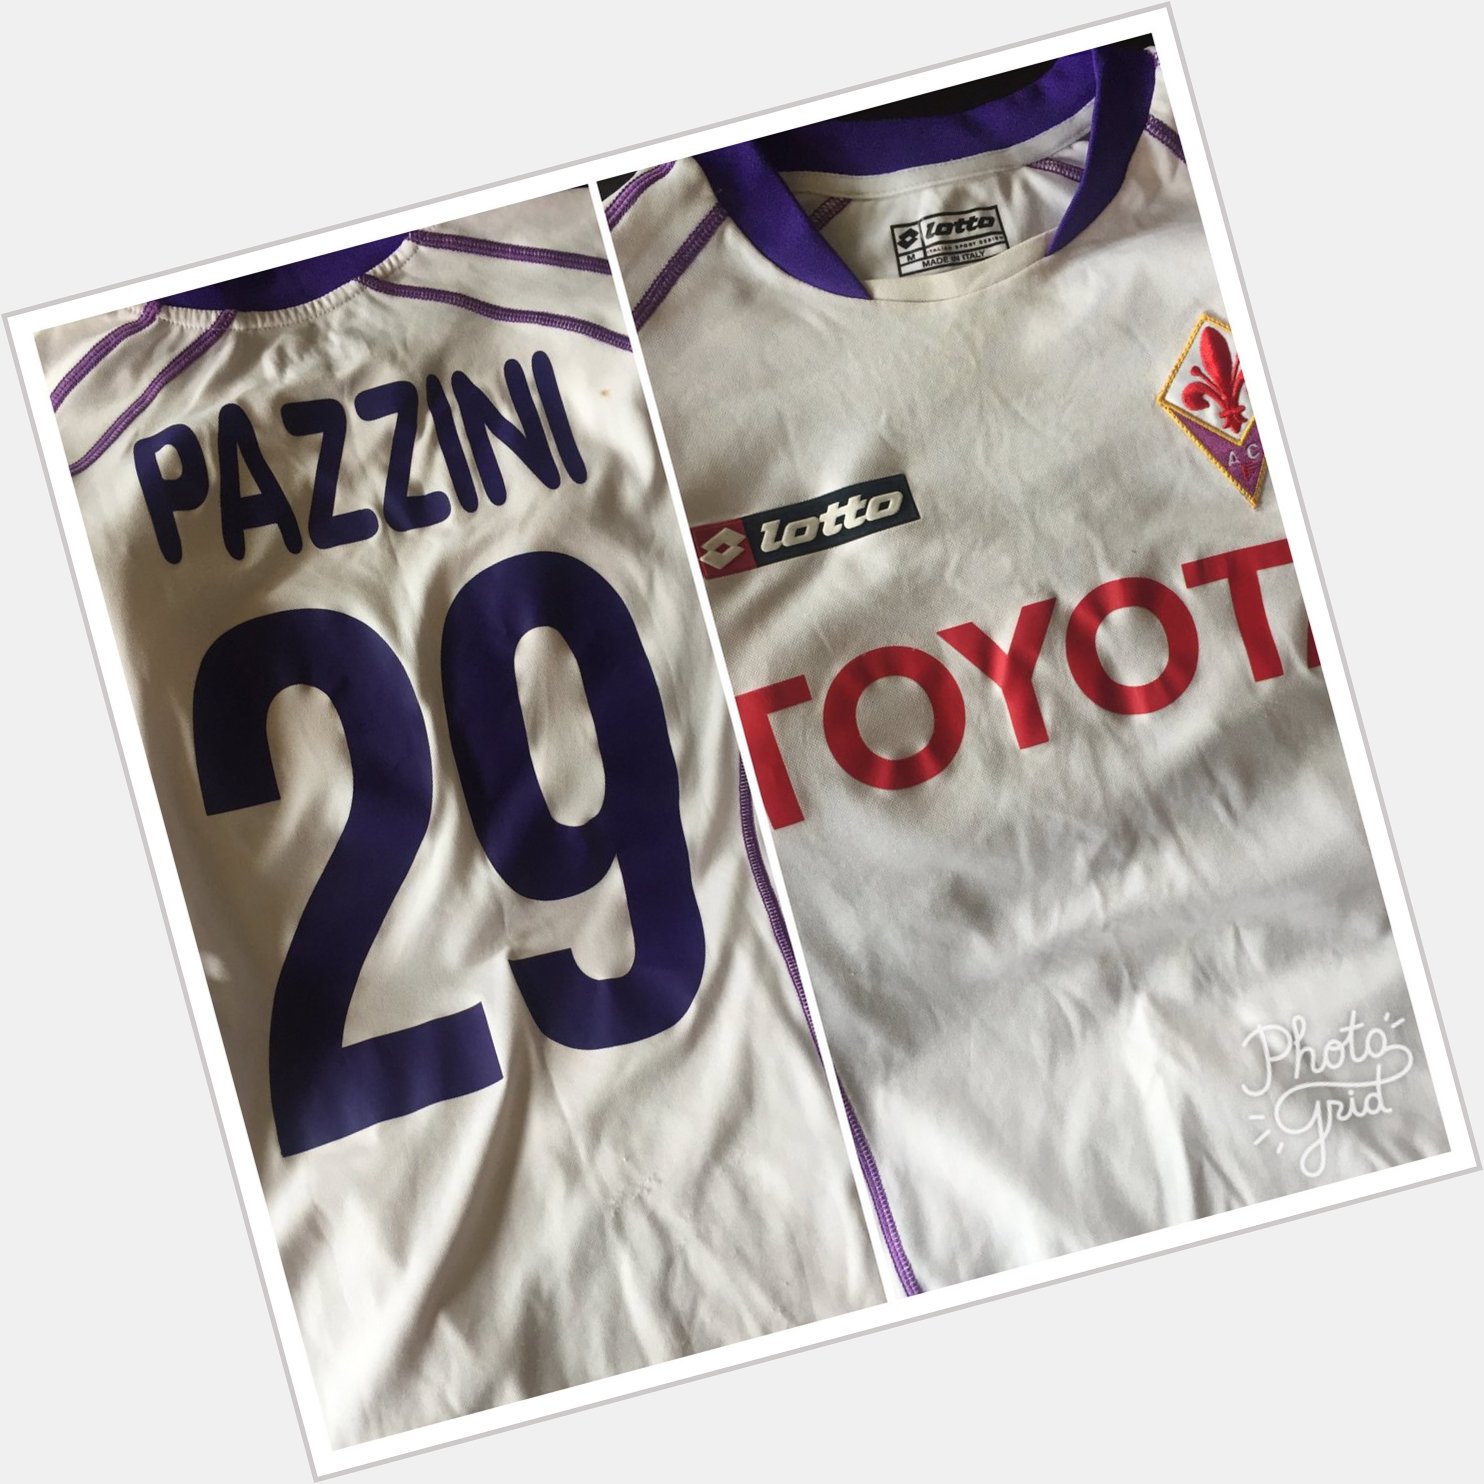 Dug this out to say Happy Birthday to Giampaolo Pazzini, 33 today! 